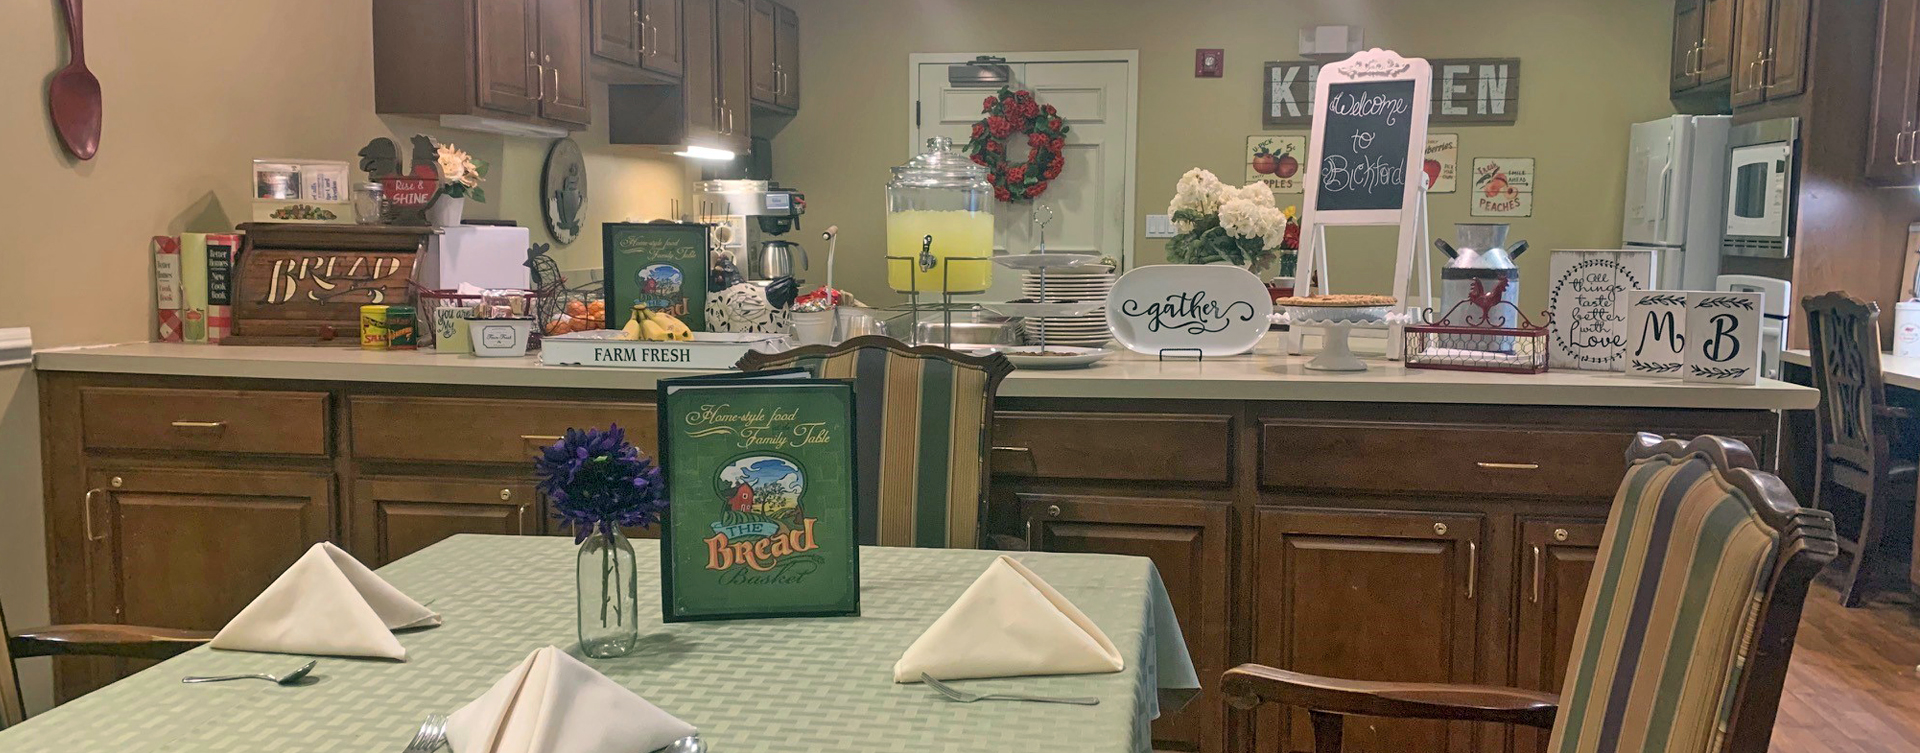 Mary B’s country kitchen helps establish routines, creates activities and triggers a sense of meal time at Bickford of Overland Park